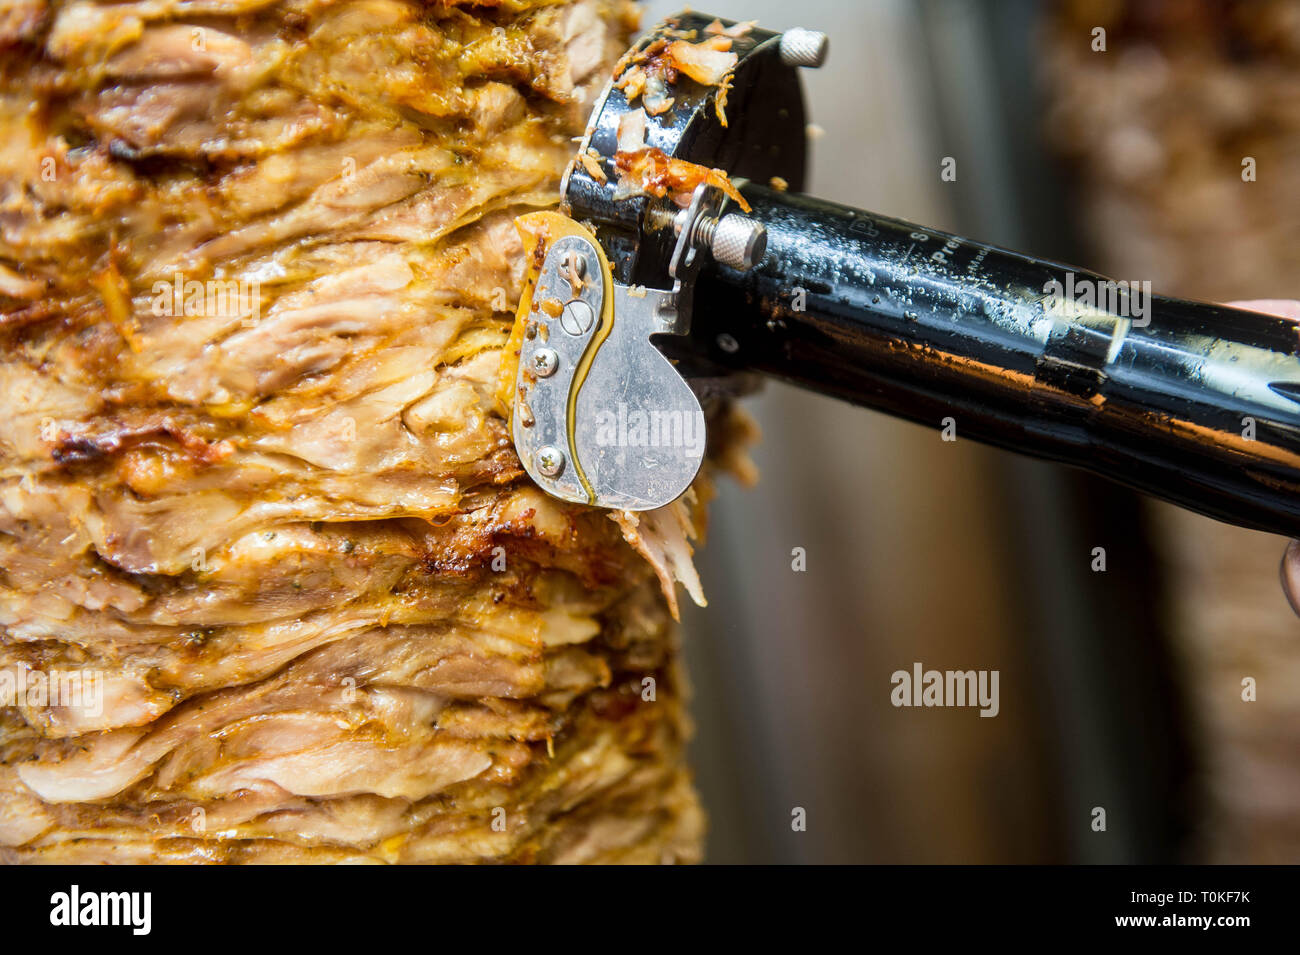 Detail of a Donner kebab meat being cut  in a Kebab shop Stock Photo